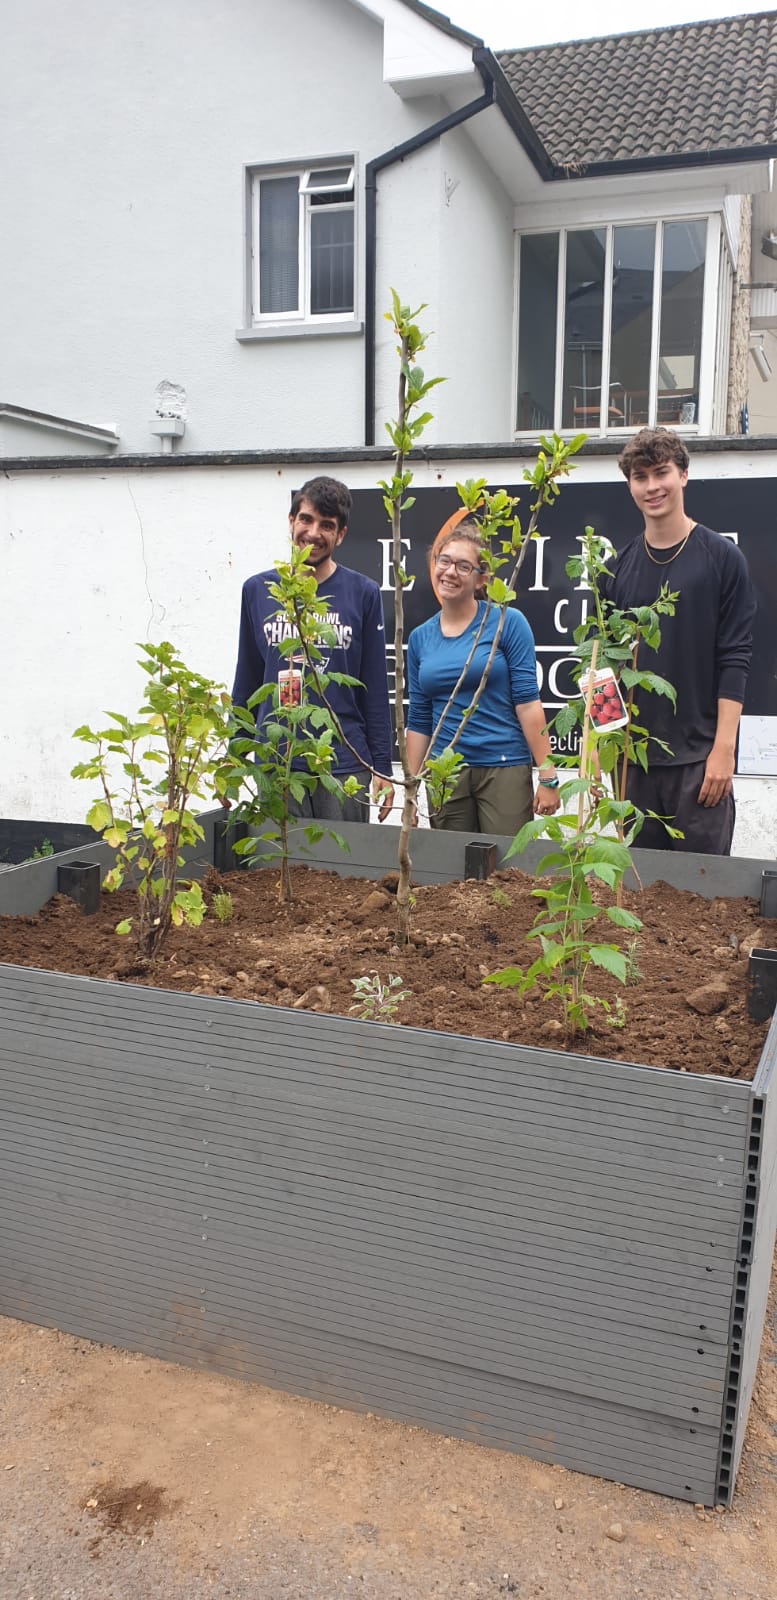 We built tree boxes in town as a mini food forest for the Bundoran community. IGY is working to become carbon neutral.